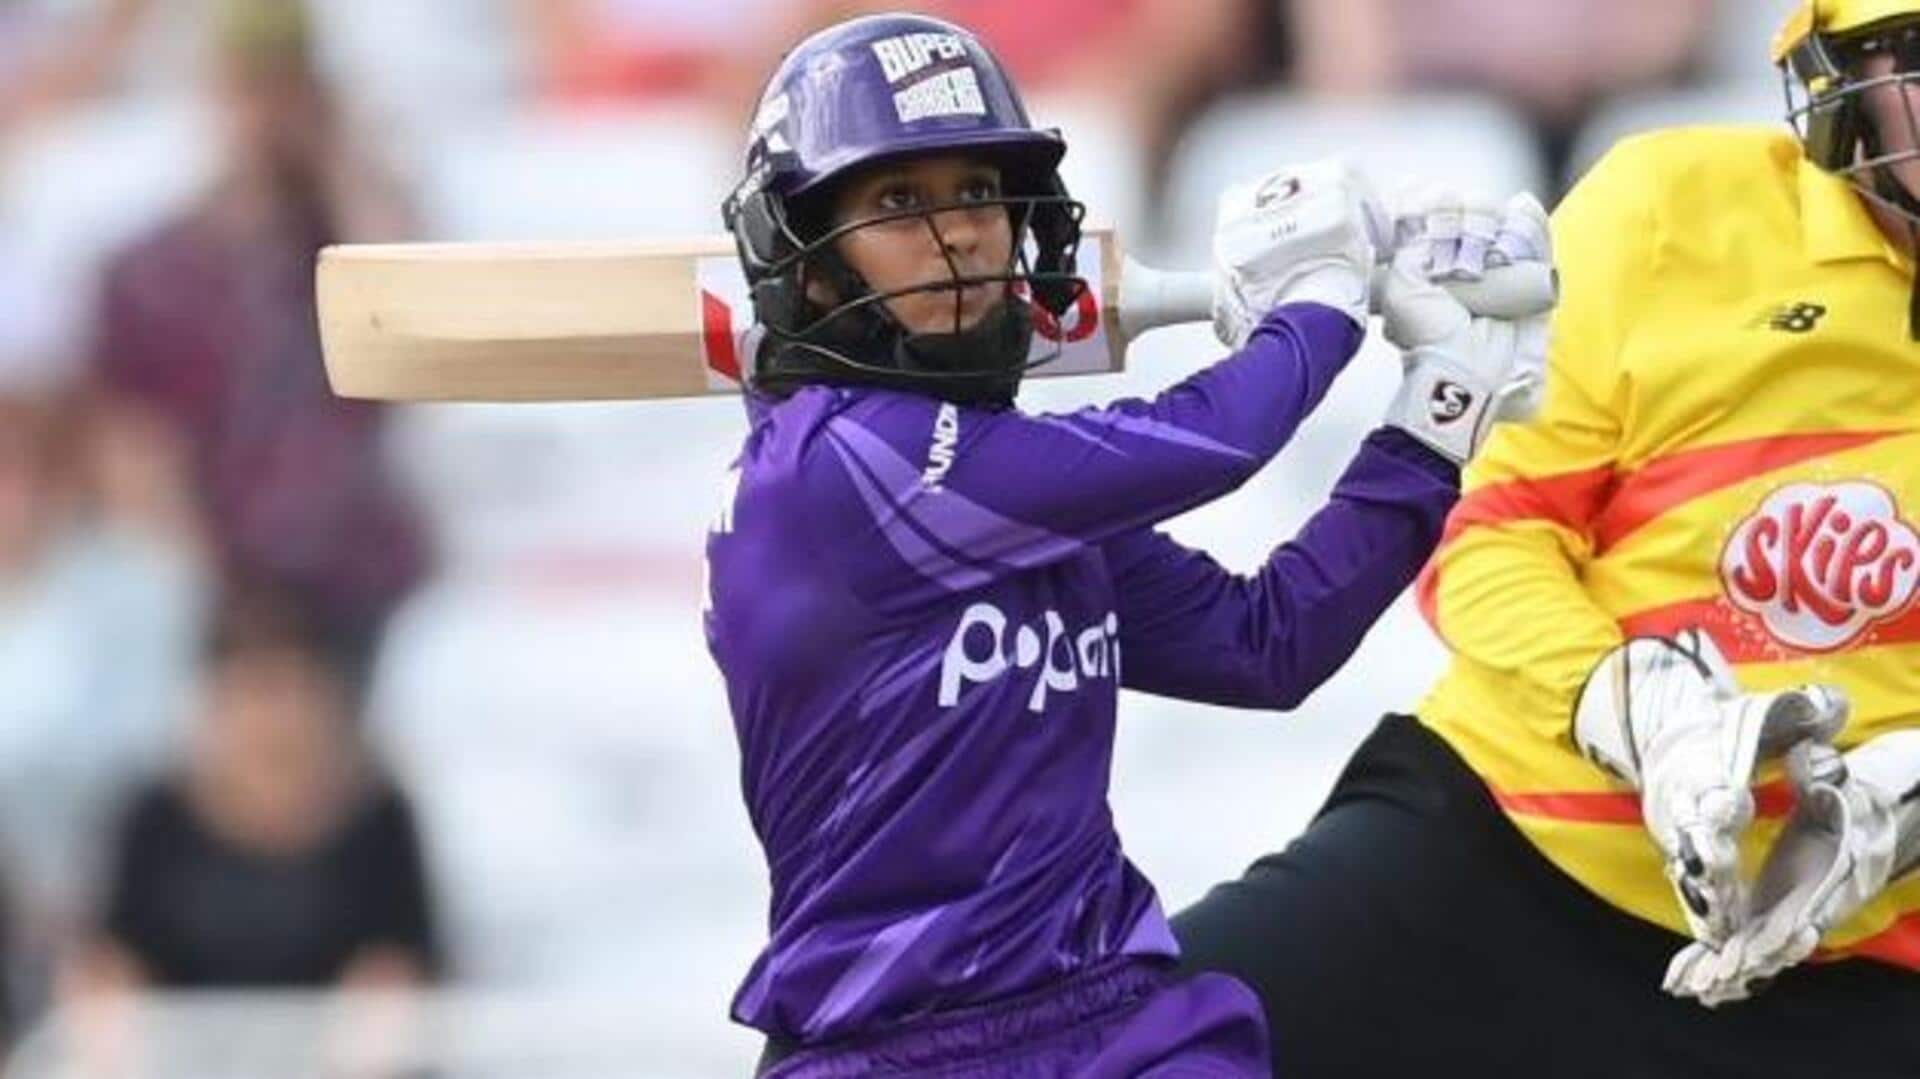 Jemimah replaces Graham in the Hundred: Decoding her T20 stats